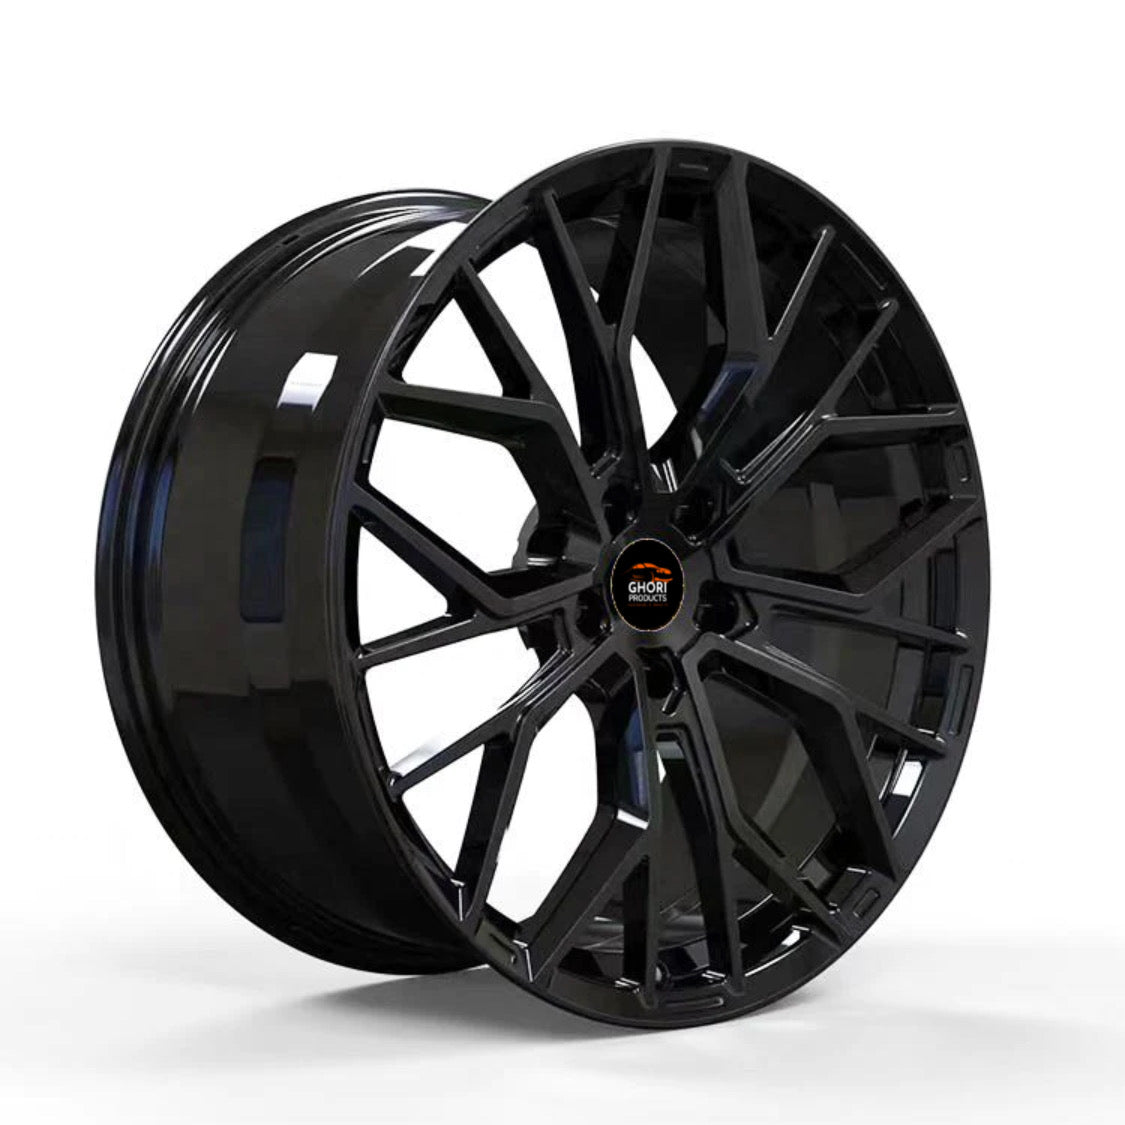 Stealth Force - Forged Aluminum T305 Wheels for Tesla Model Y 5X114.3 (Set of 4)